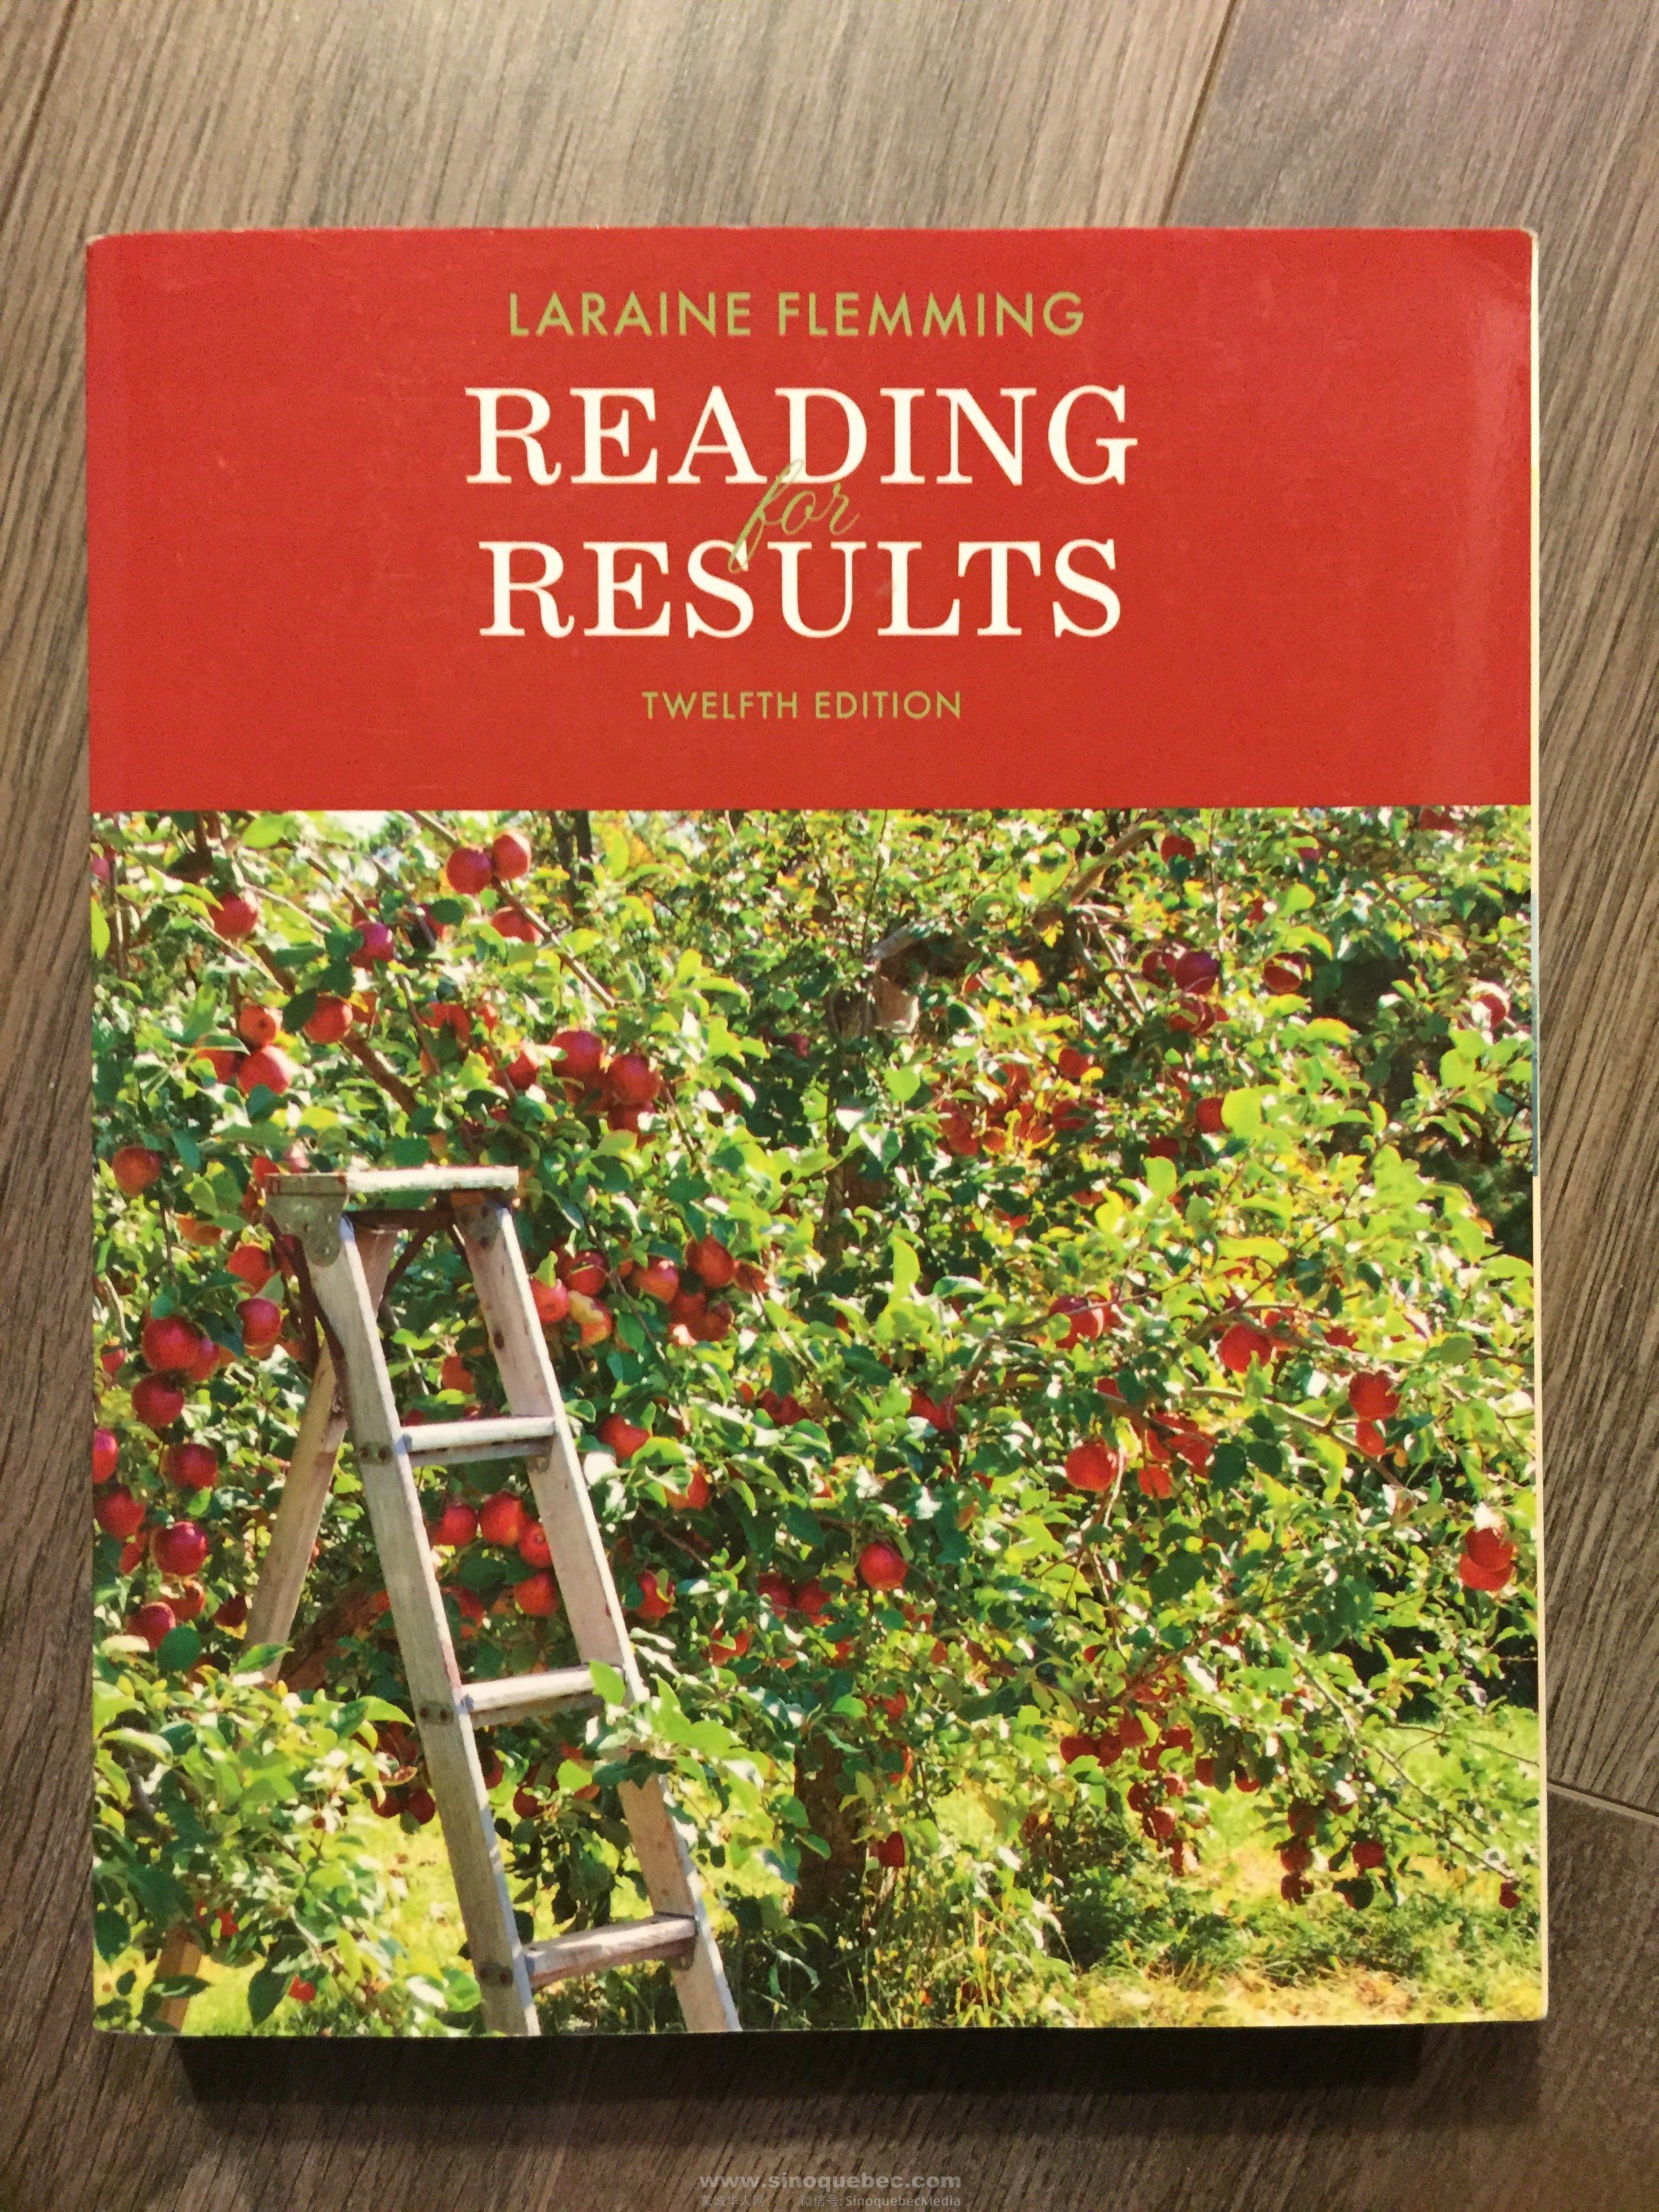 Reading results